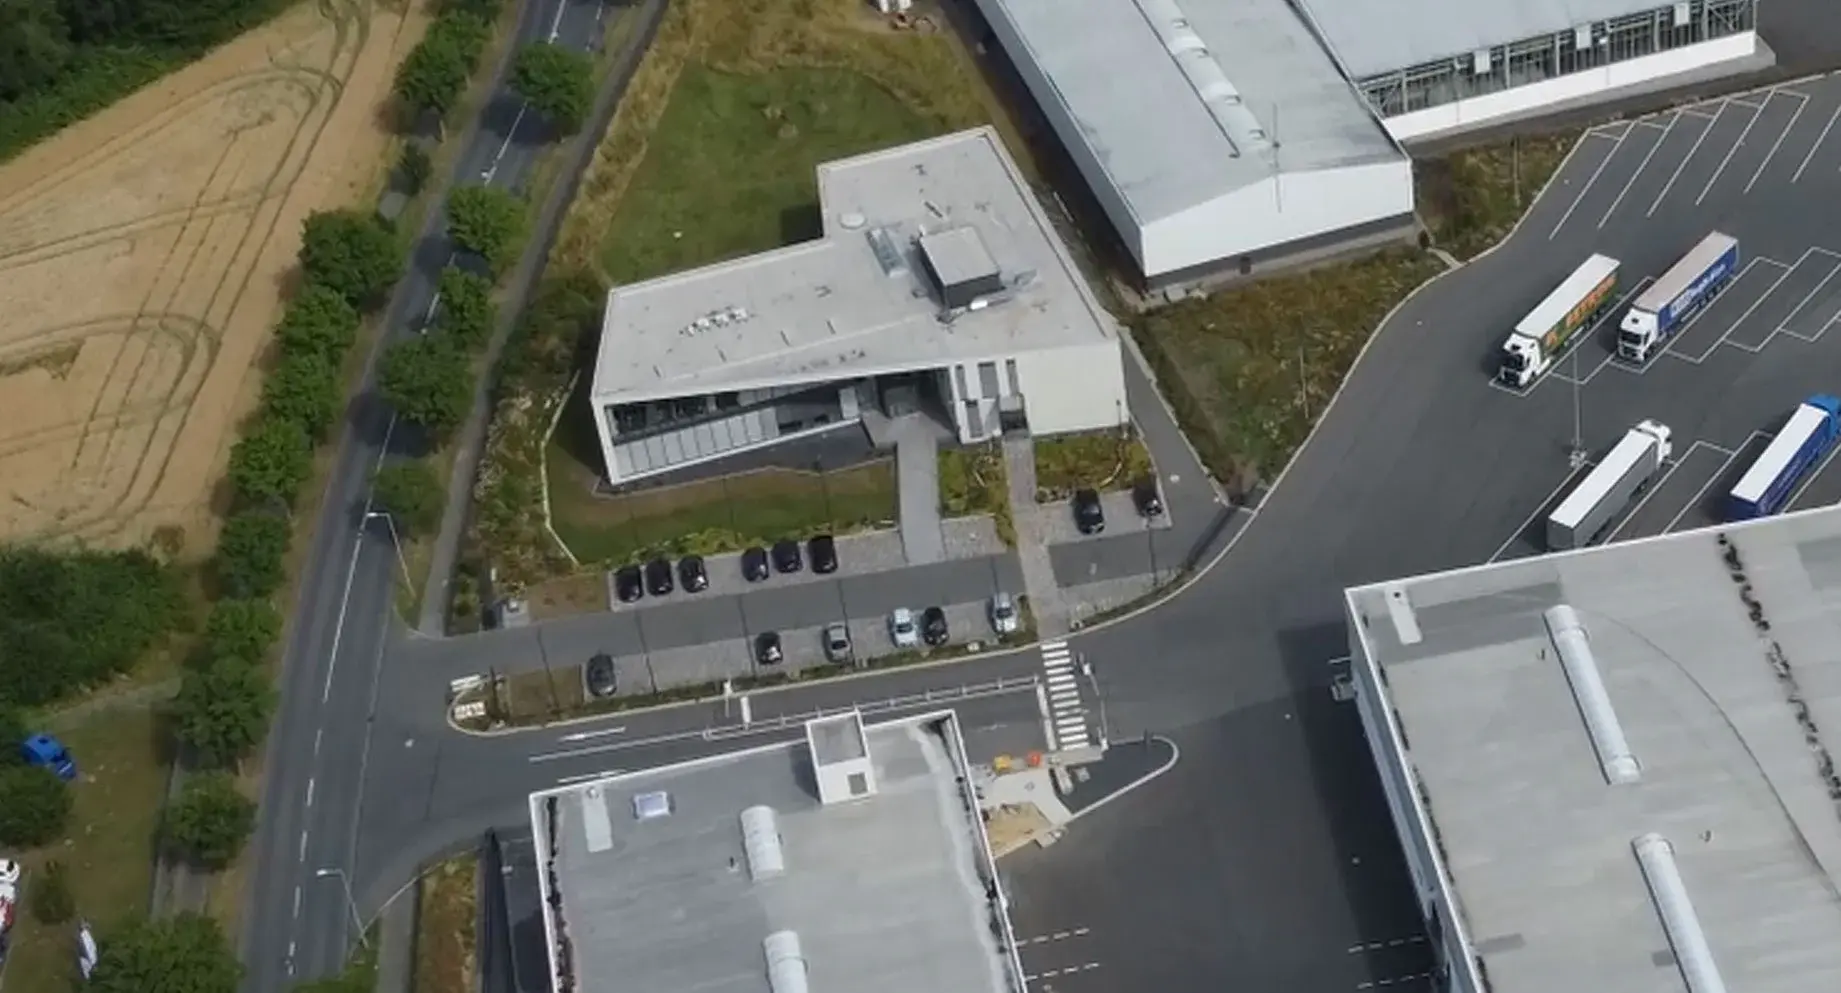 Drone image of the company premises of Albrecht Zwick GmbH